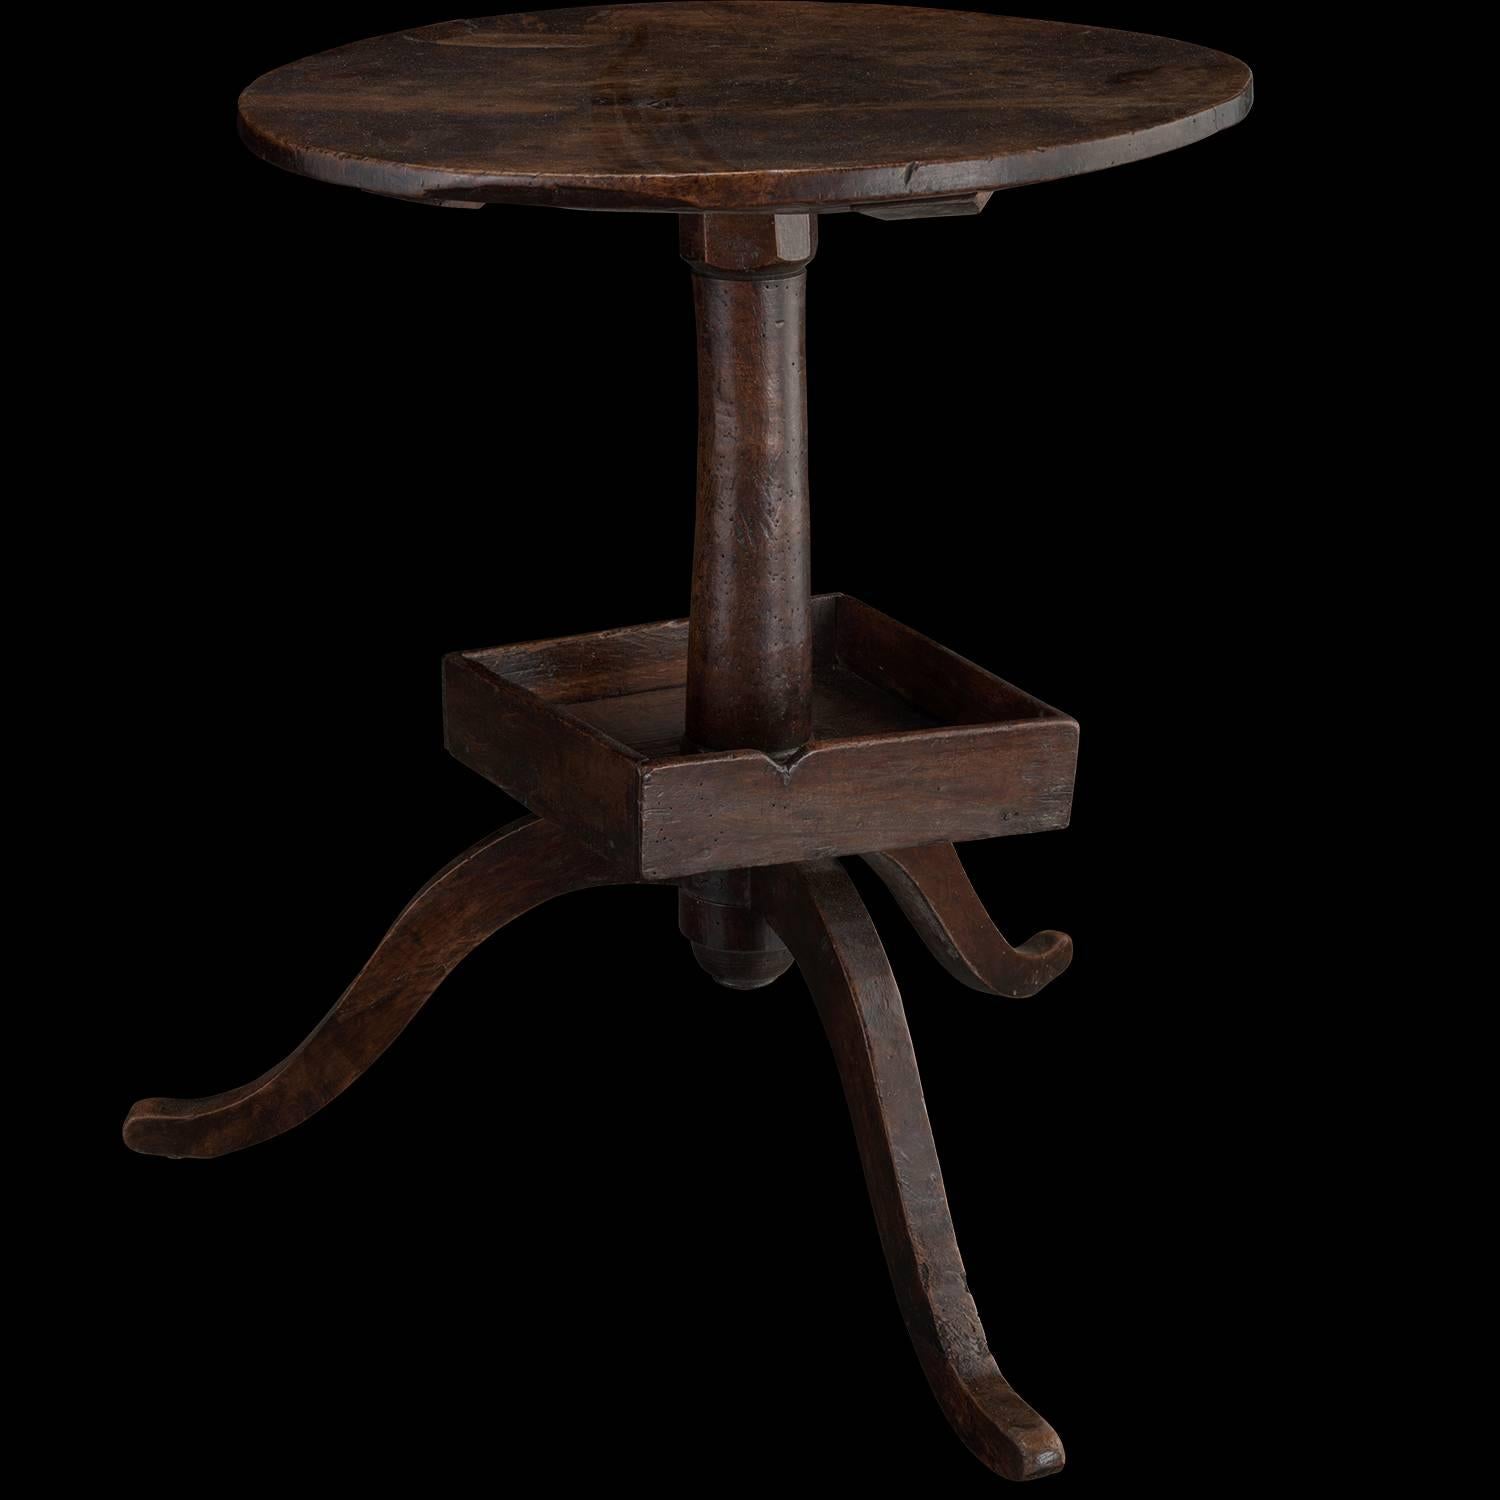 Walnut side table.

France, circa 1760.

Thoughtfully designed, primitively carved table with square inset shelf just above the three splayed legs.

Measures: 20.75" diameter x 25.5" height.